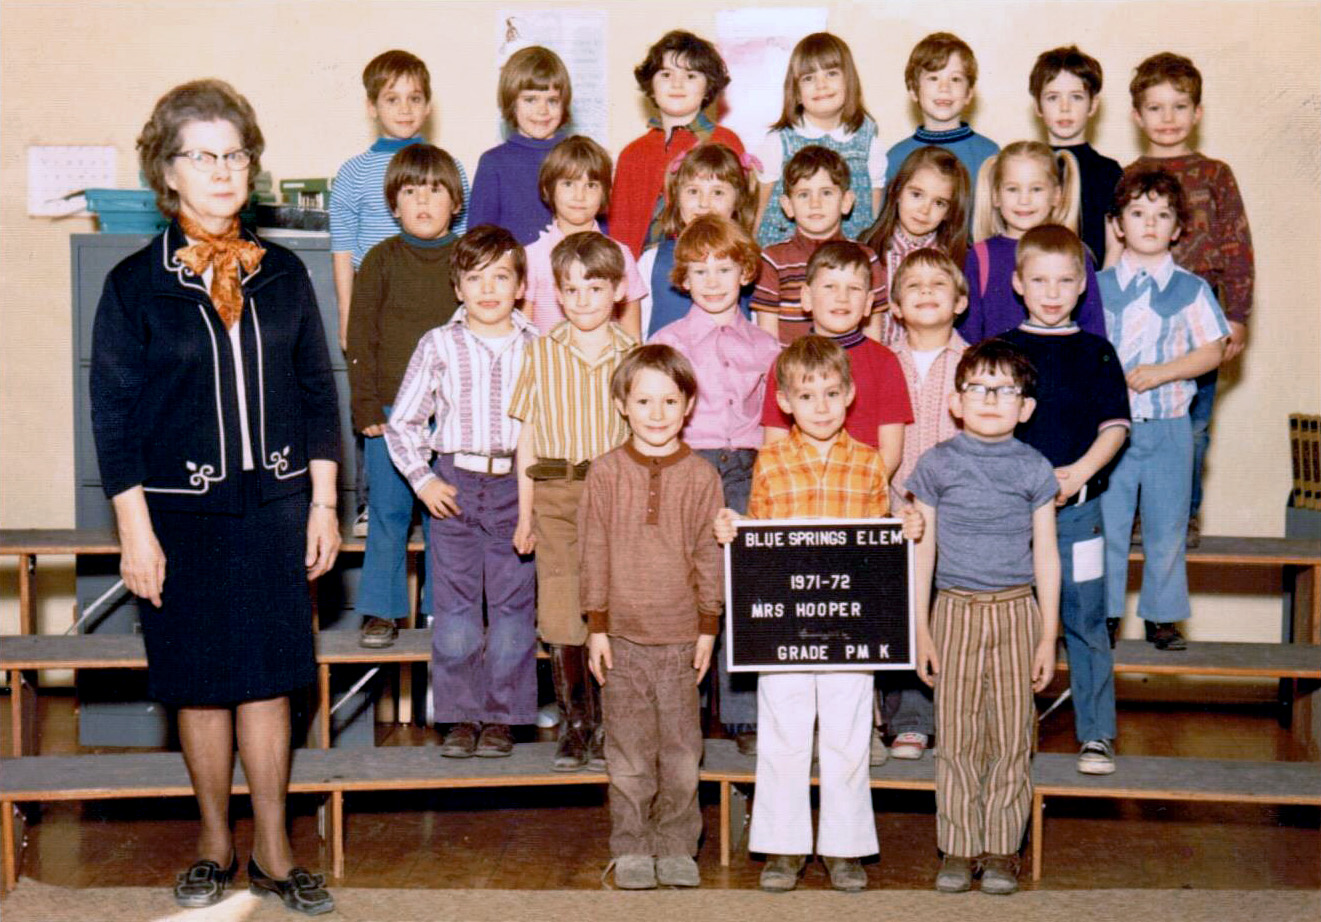 That's me up front, holding the sign and rocking those white pants. Blue Springs, Missouri 1971. View full size.